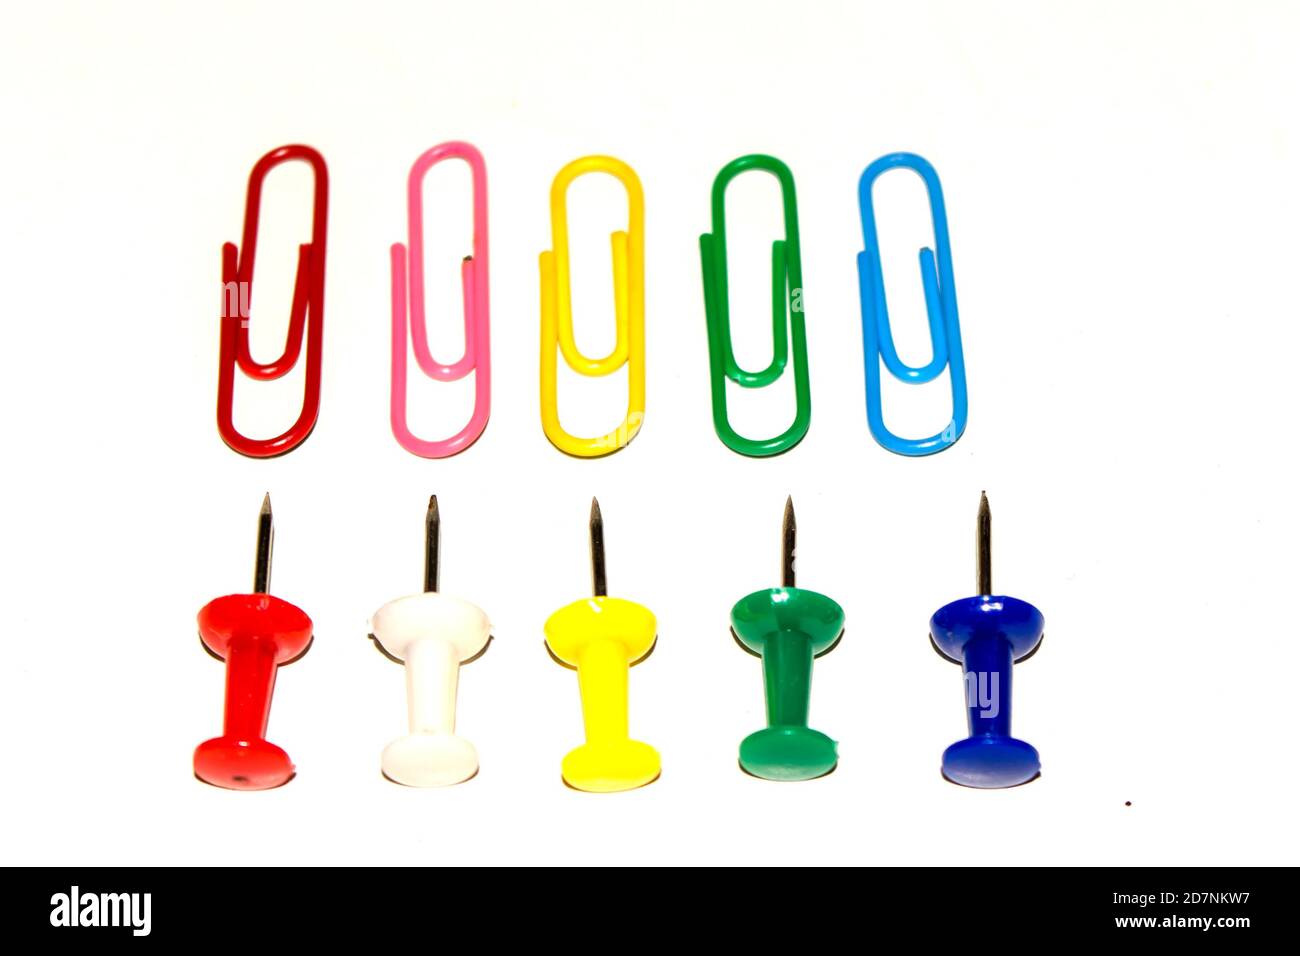 https://c8.alamy.com/comp/2D7NKW7/push-pins-and-paper-clips-in-different-colors-isolated-on-white-background-2D7NKW7.jpg